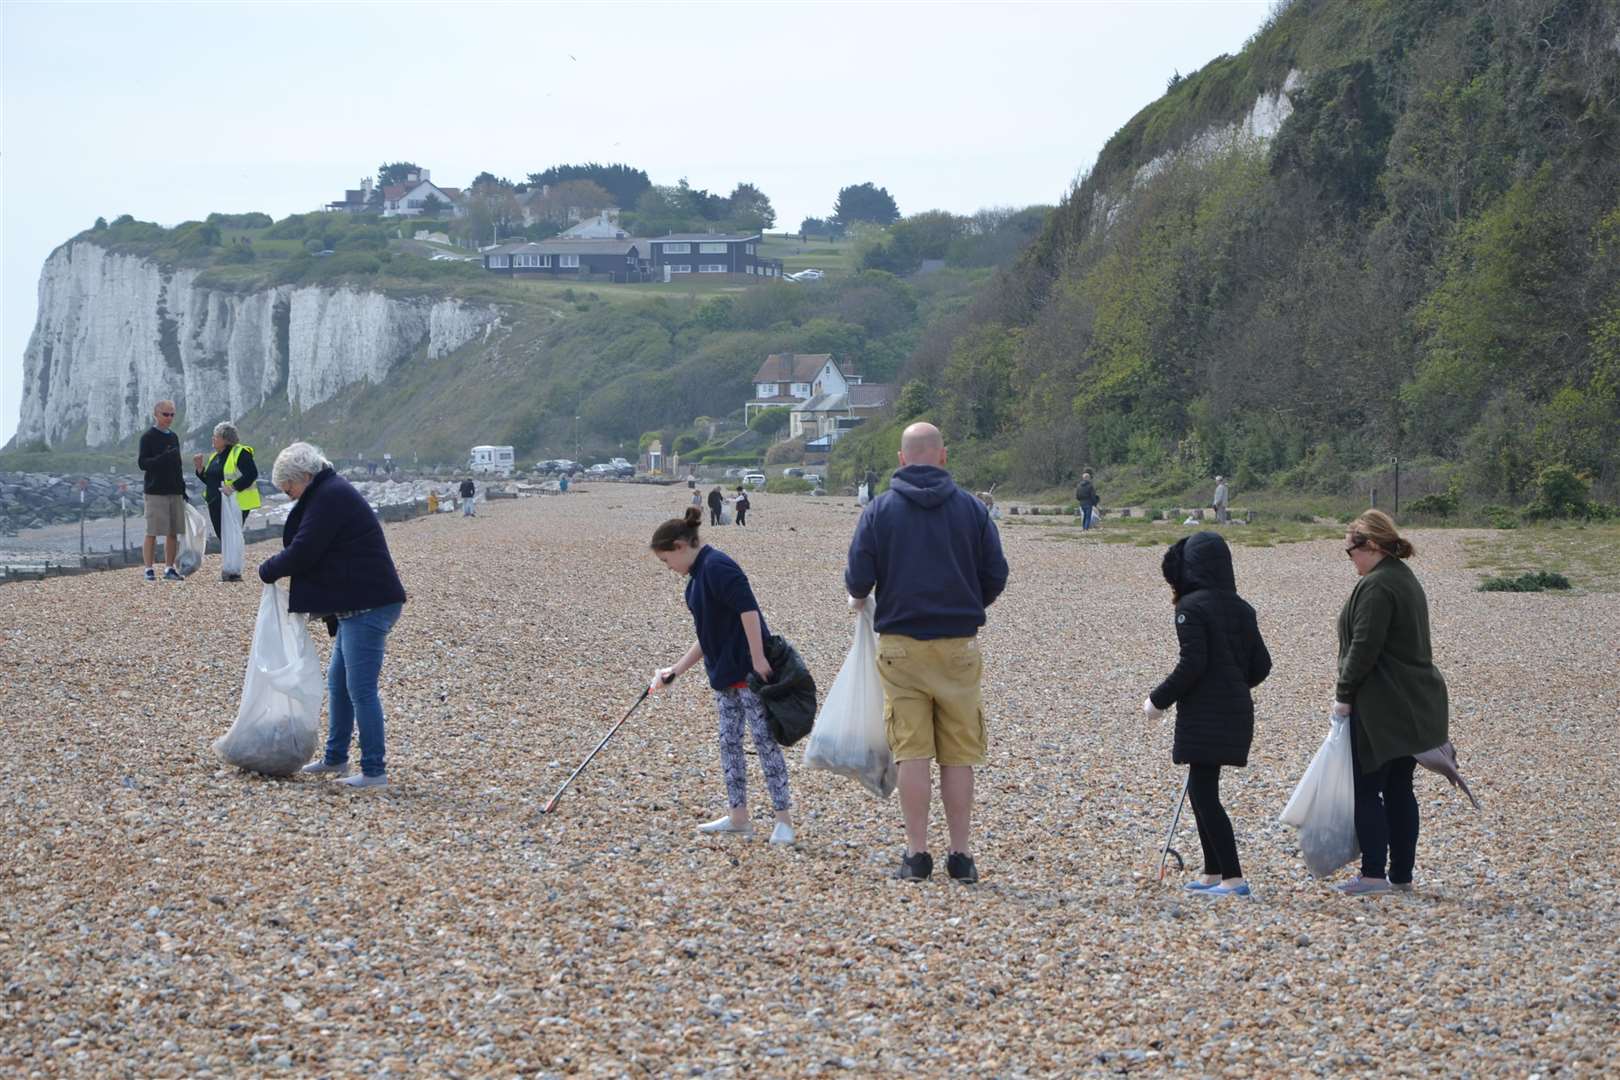 Families and people of all ages are welcome at the Cuddle Earth beach clean